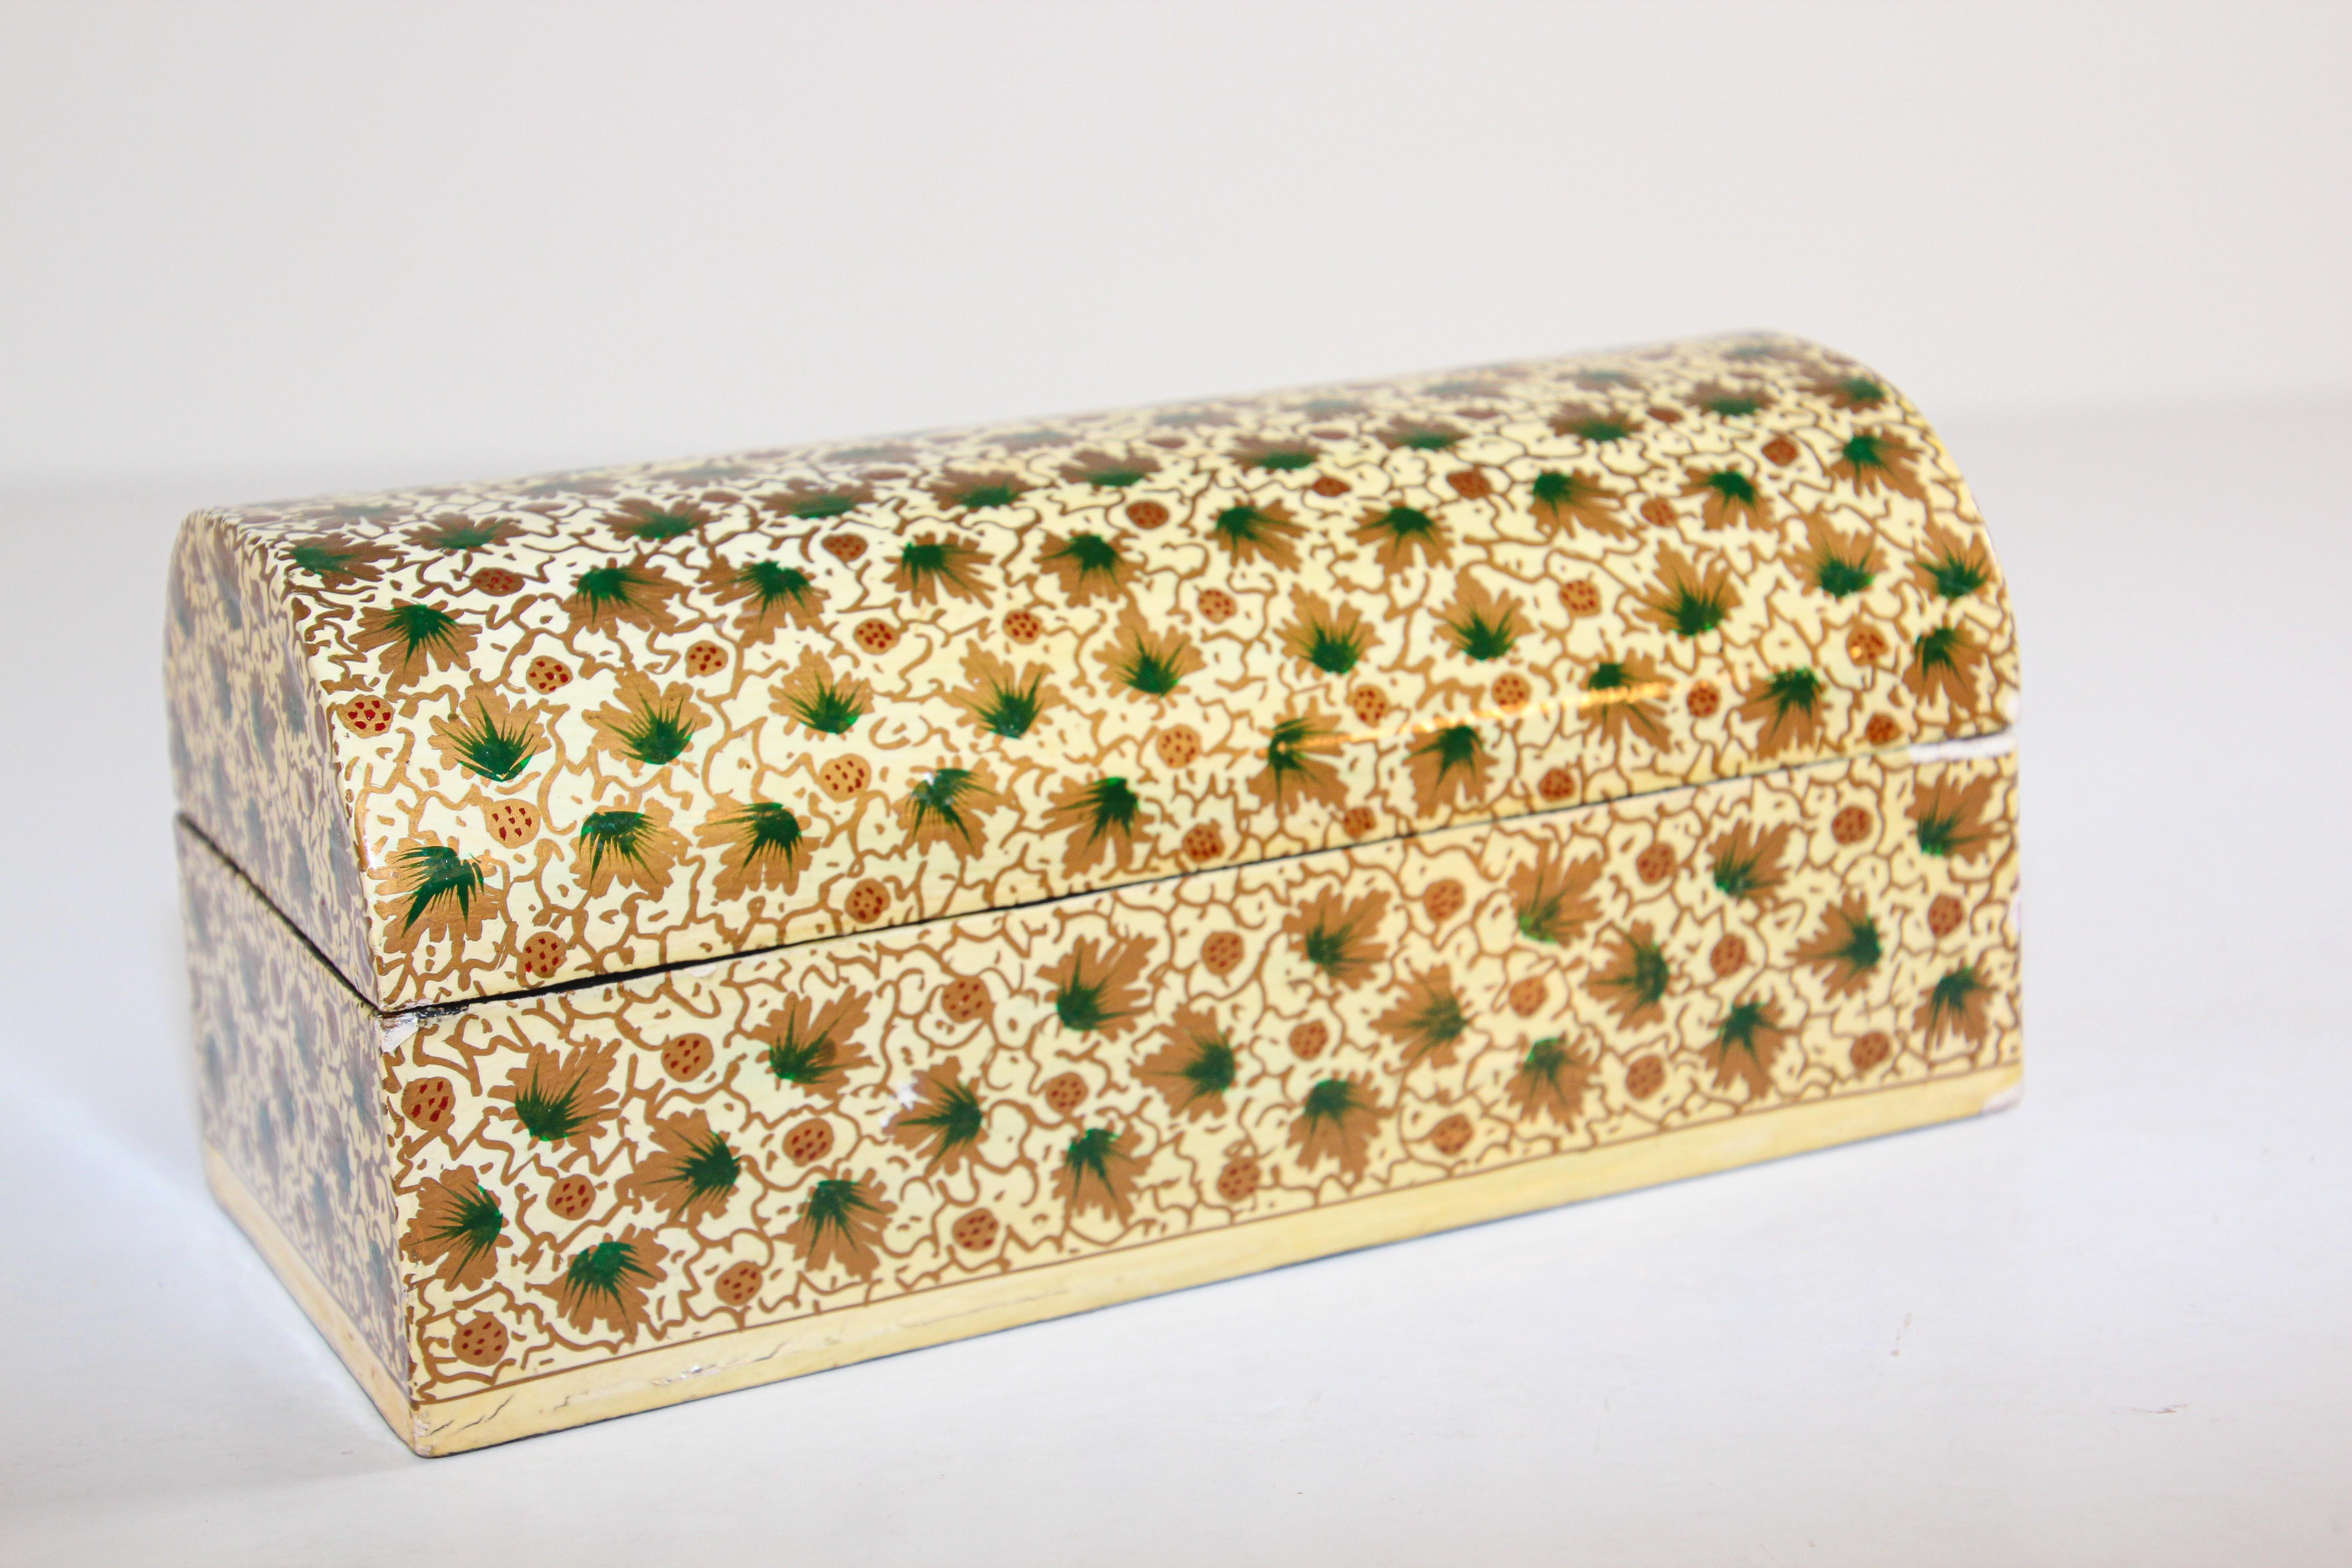 Hand painted Rajasthani Moorish papier mache lacquered box in rectangular shape with dome lid decorated with floral designs in green and gold on ivory color background, interior is black.
Great decorative Indo Persian style papier mache lacquer